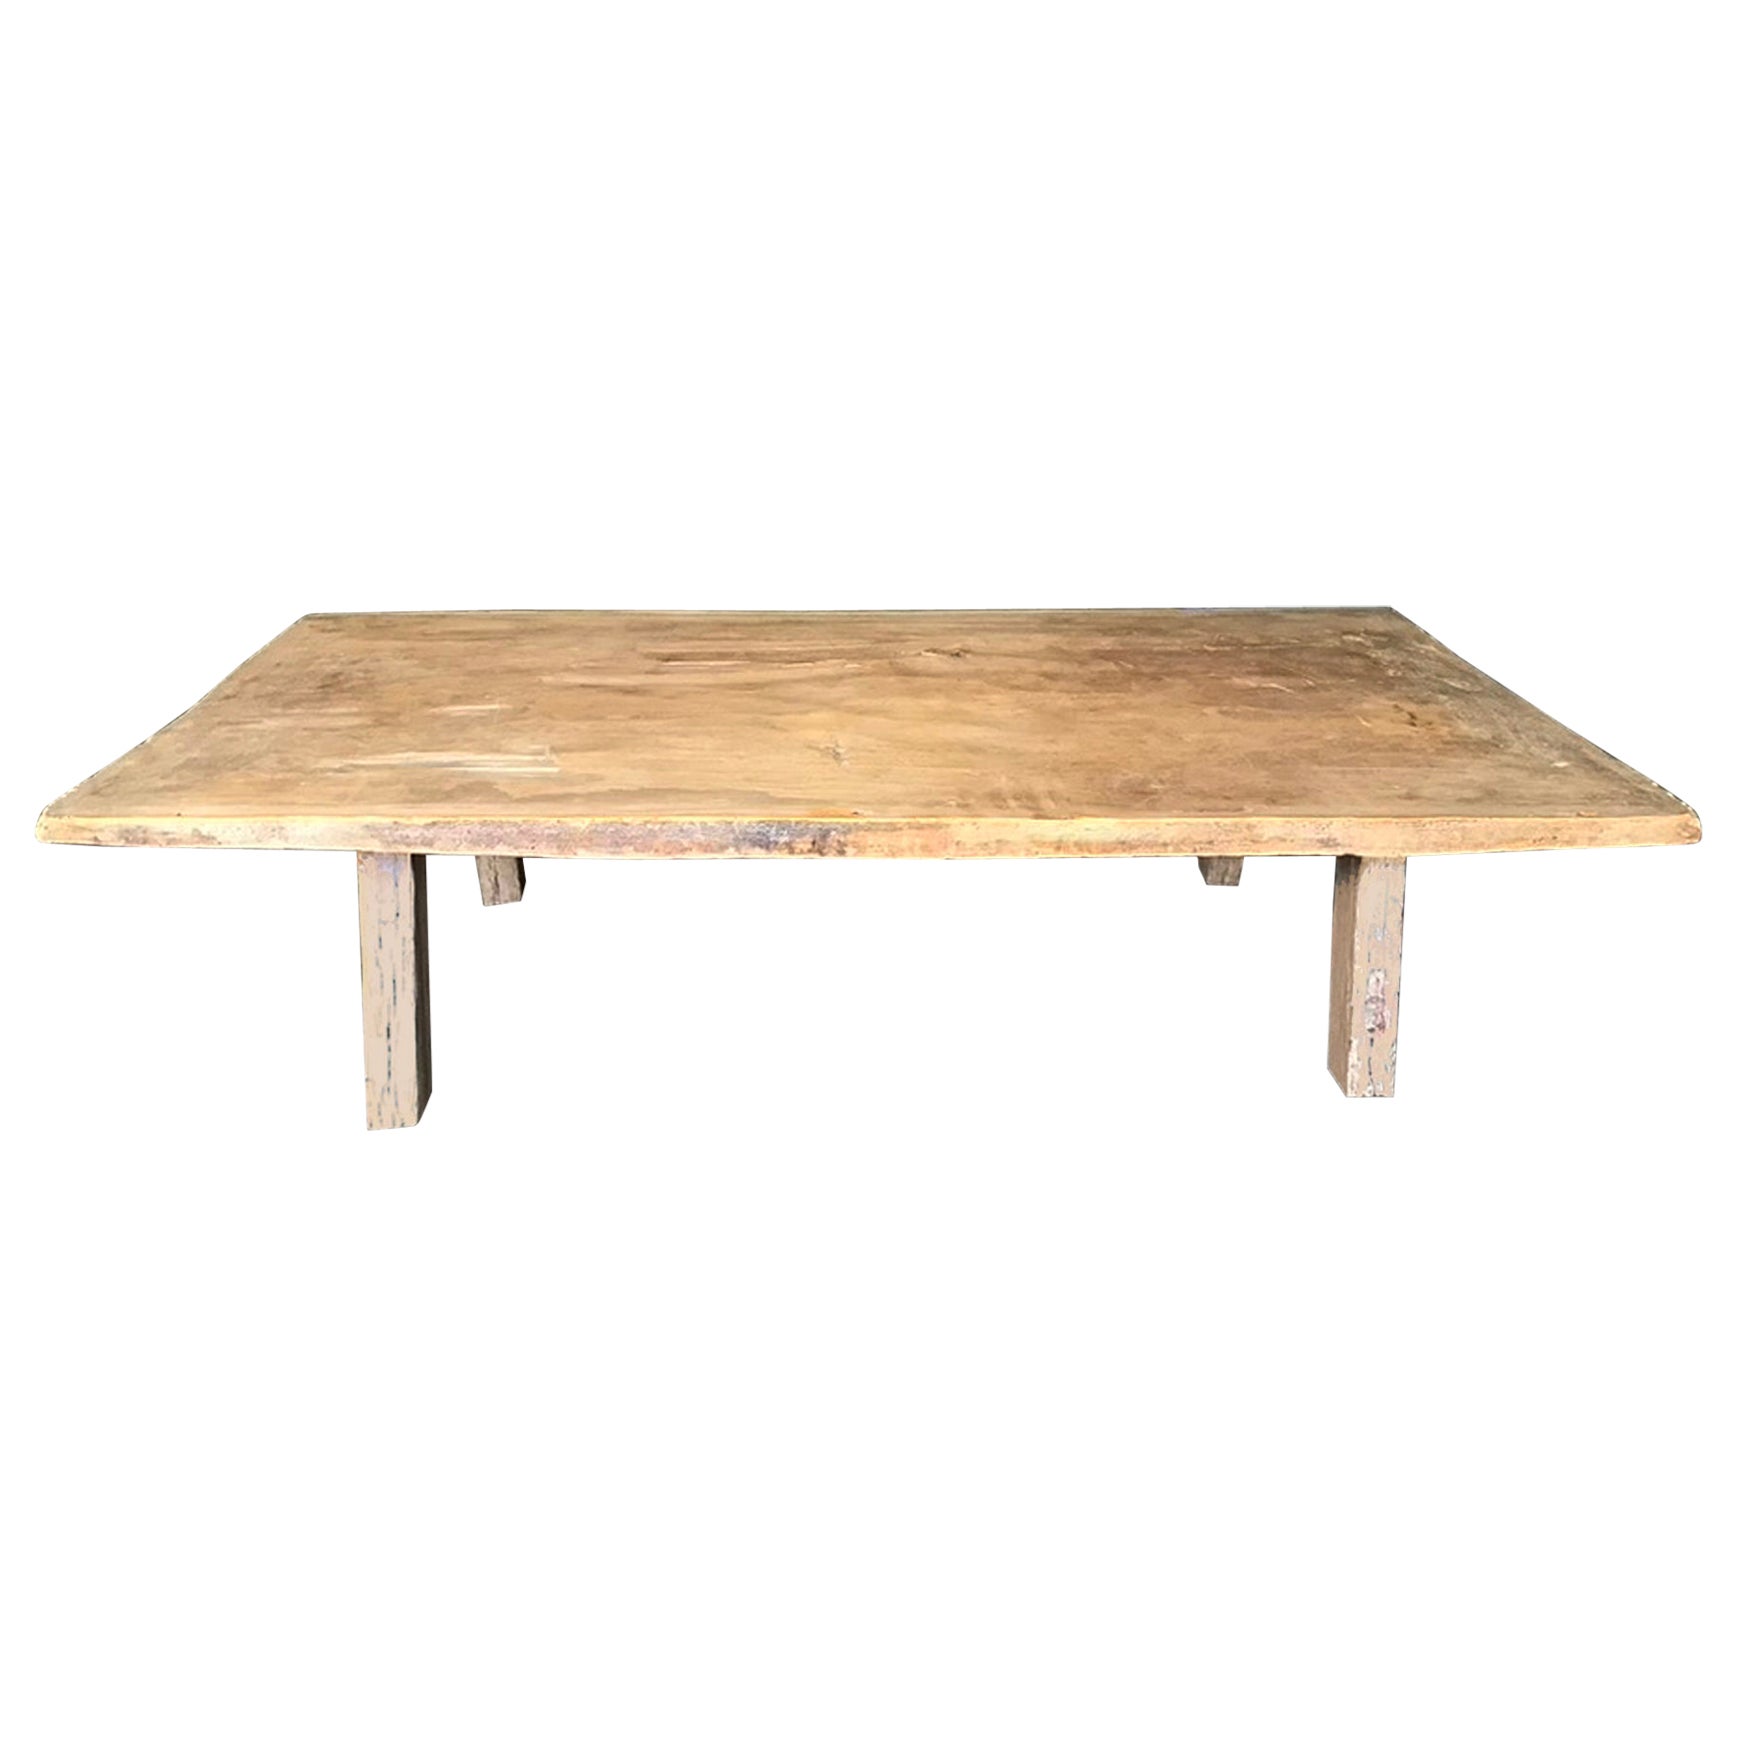 One Wide Antique Board Coffee Table